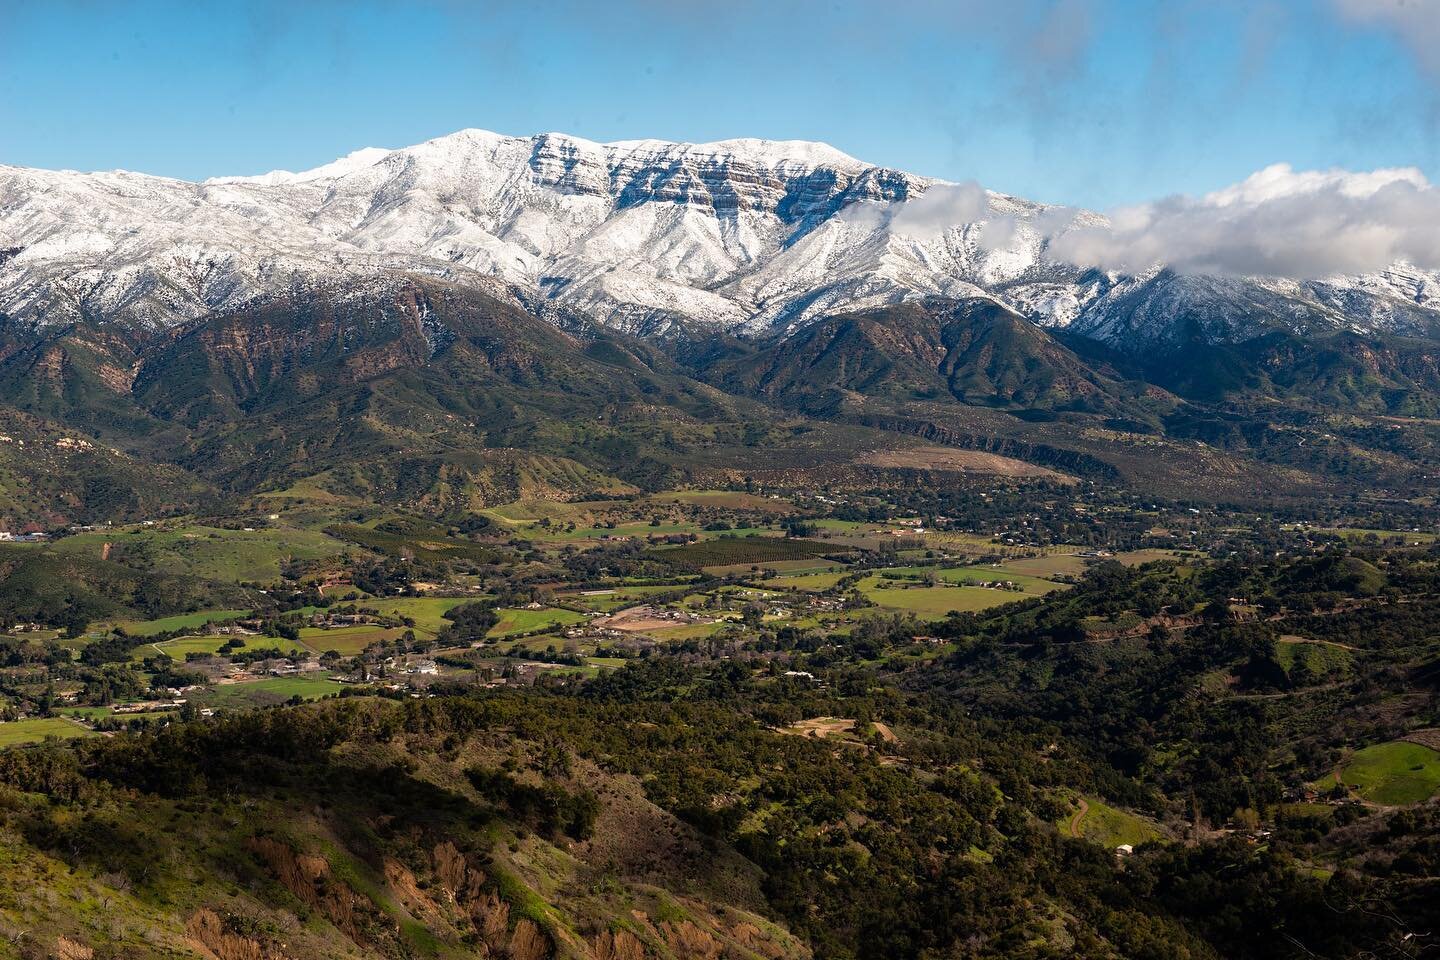 #topatopa mountains in #ojai looking majestic after the snow.